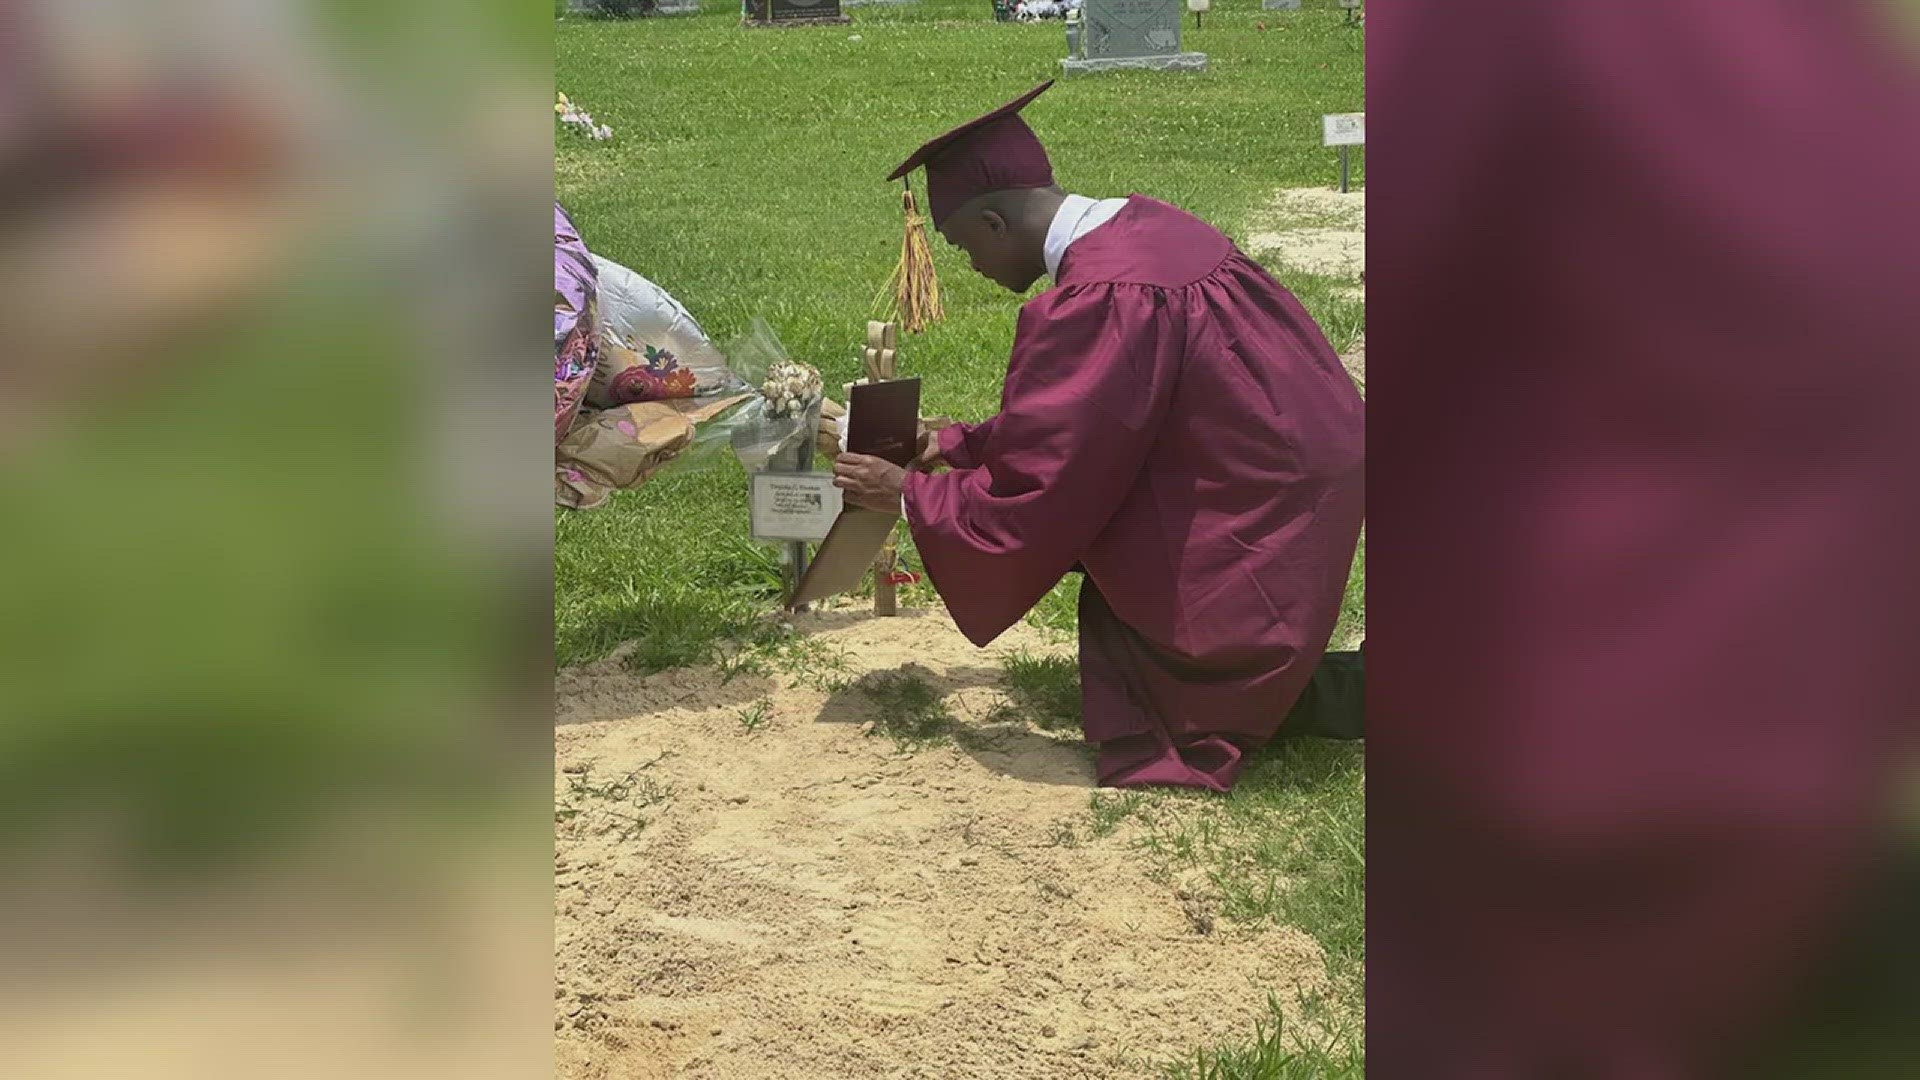 DeShawn Martin lost his mom Trenisha Freeman to diabetes. He felt lost without her, but he continued to push through his grief to reach his goal of graduating.